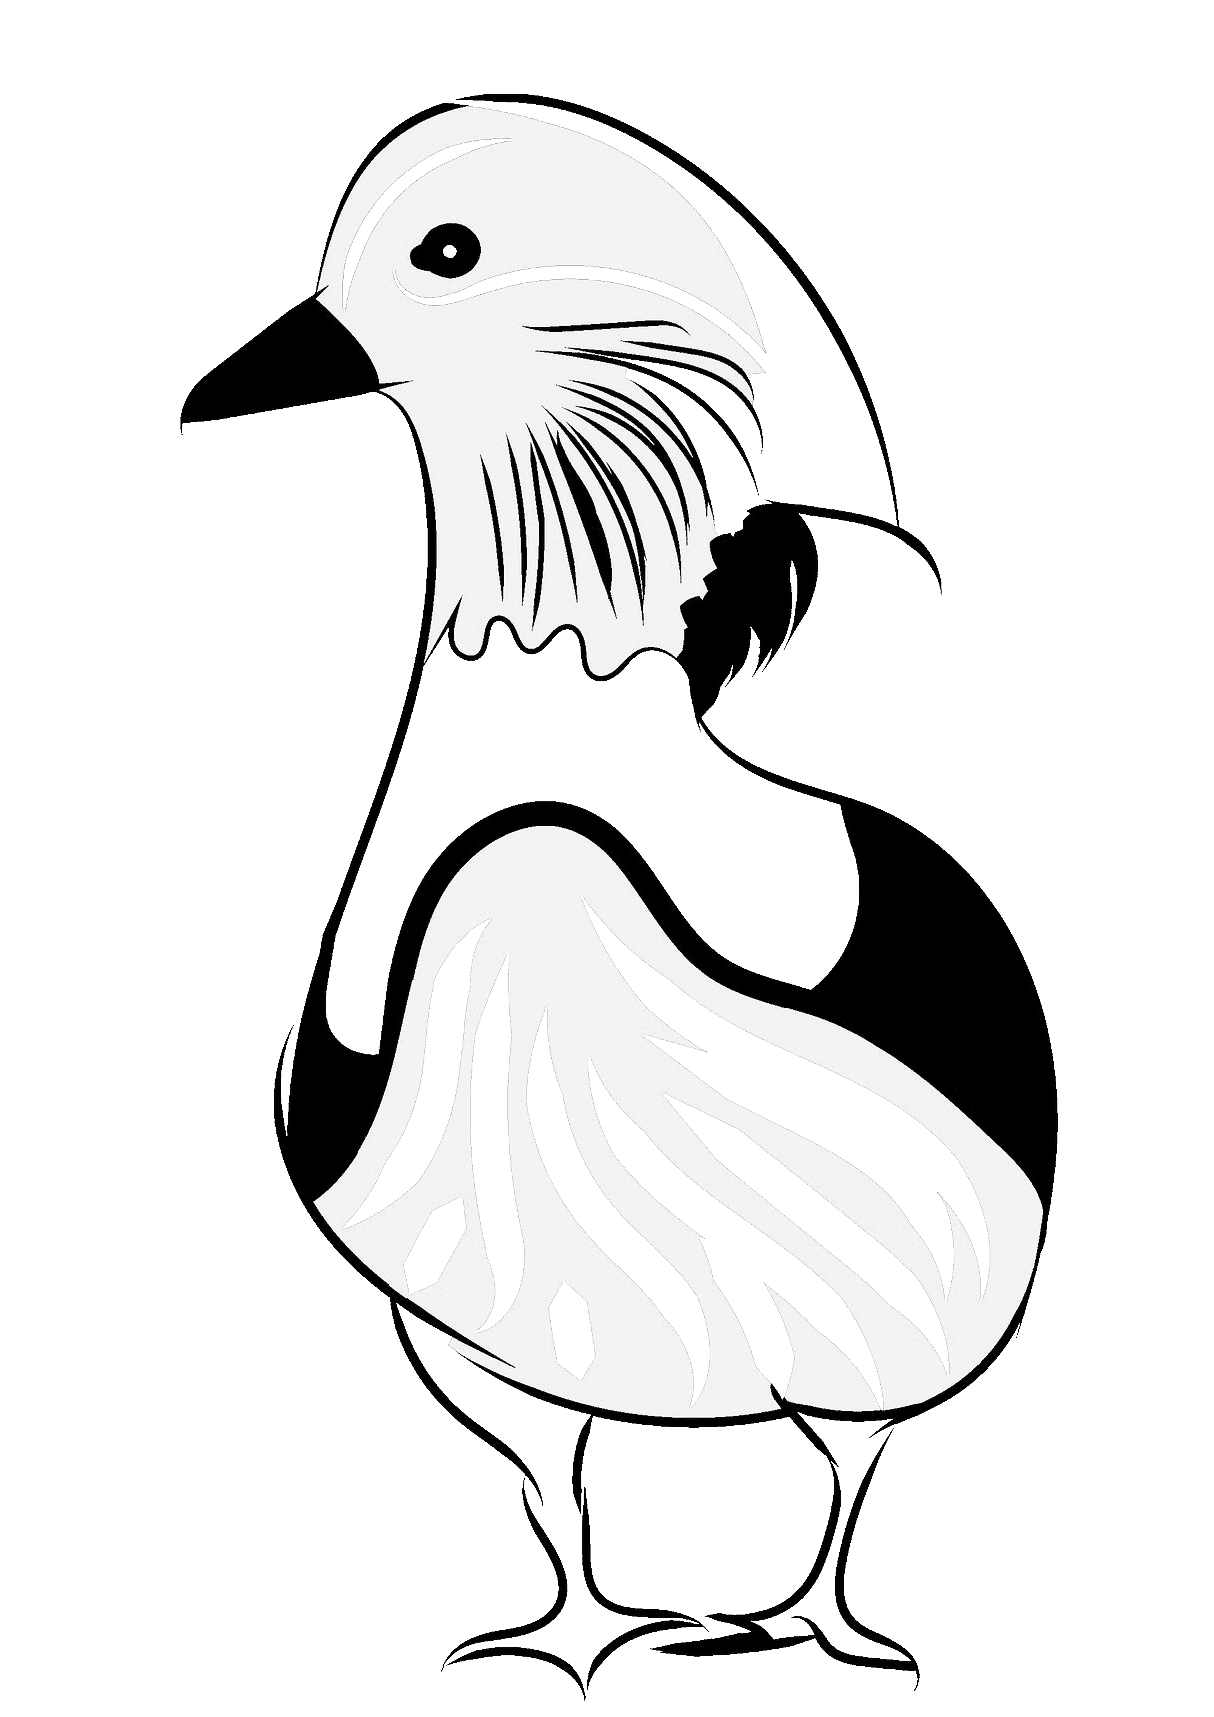 Mandarin duck has distinctive long feathers on the side of the face Coloring Page